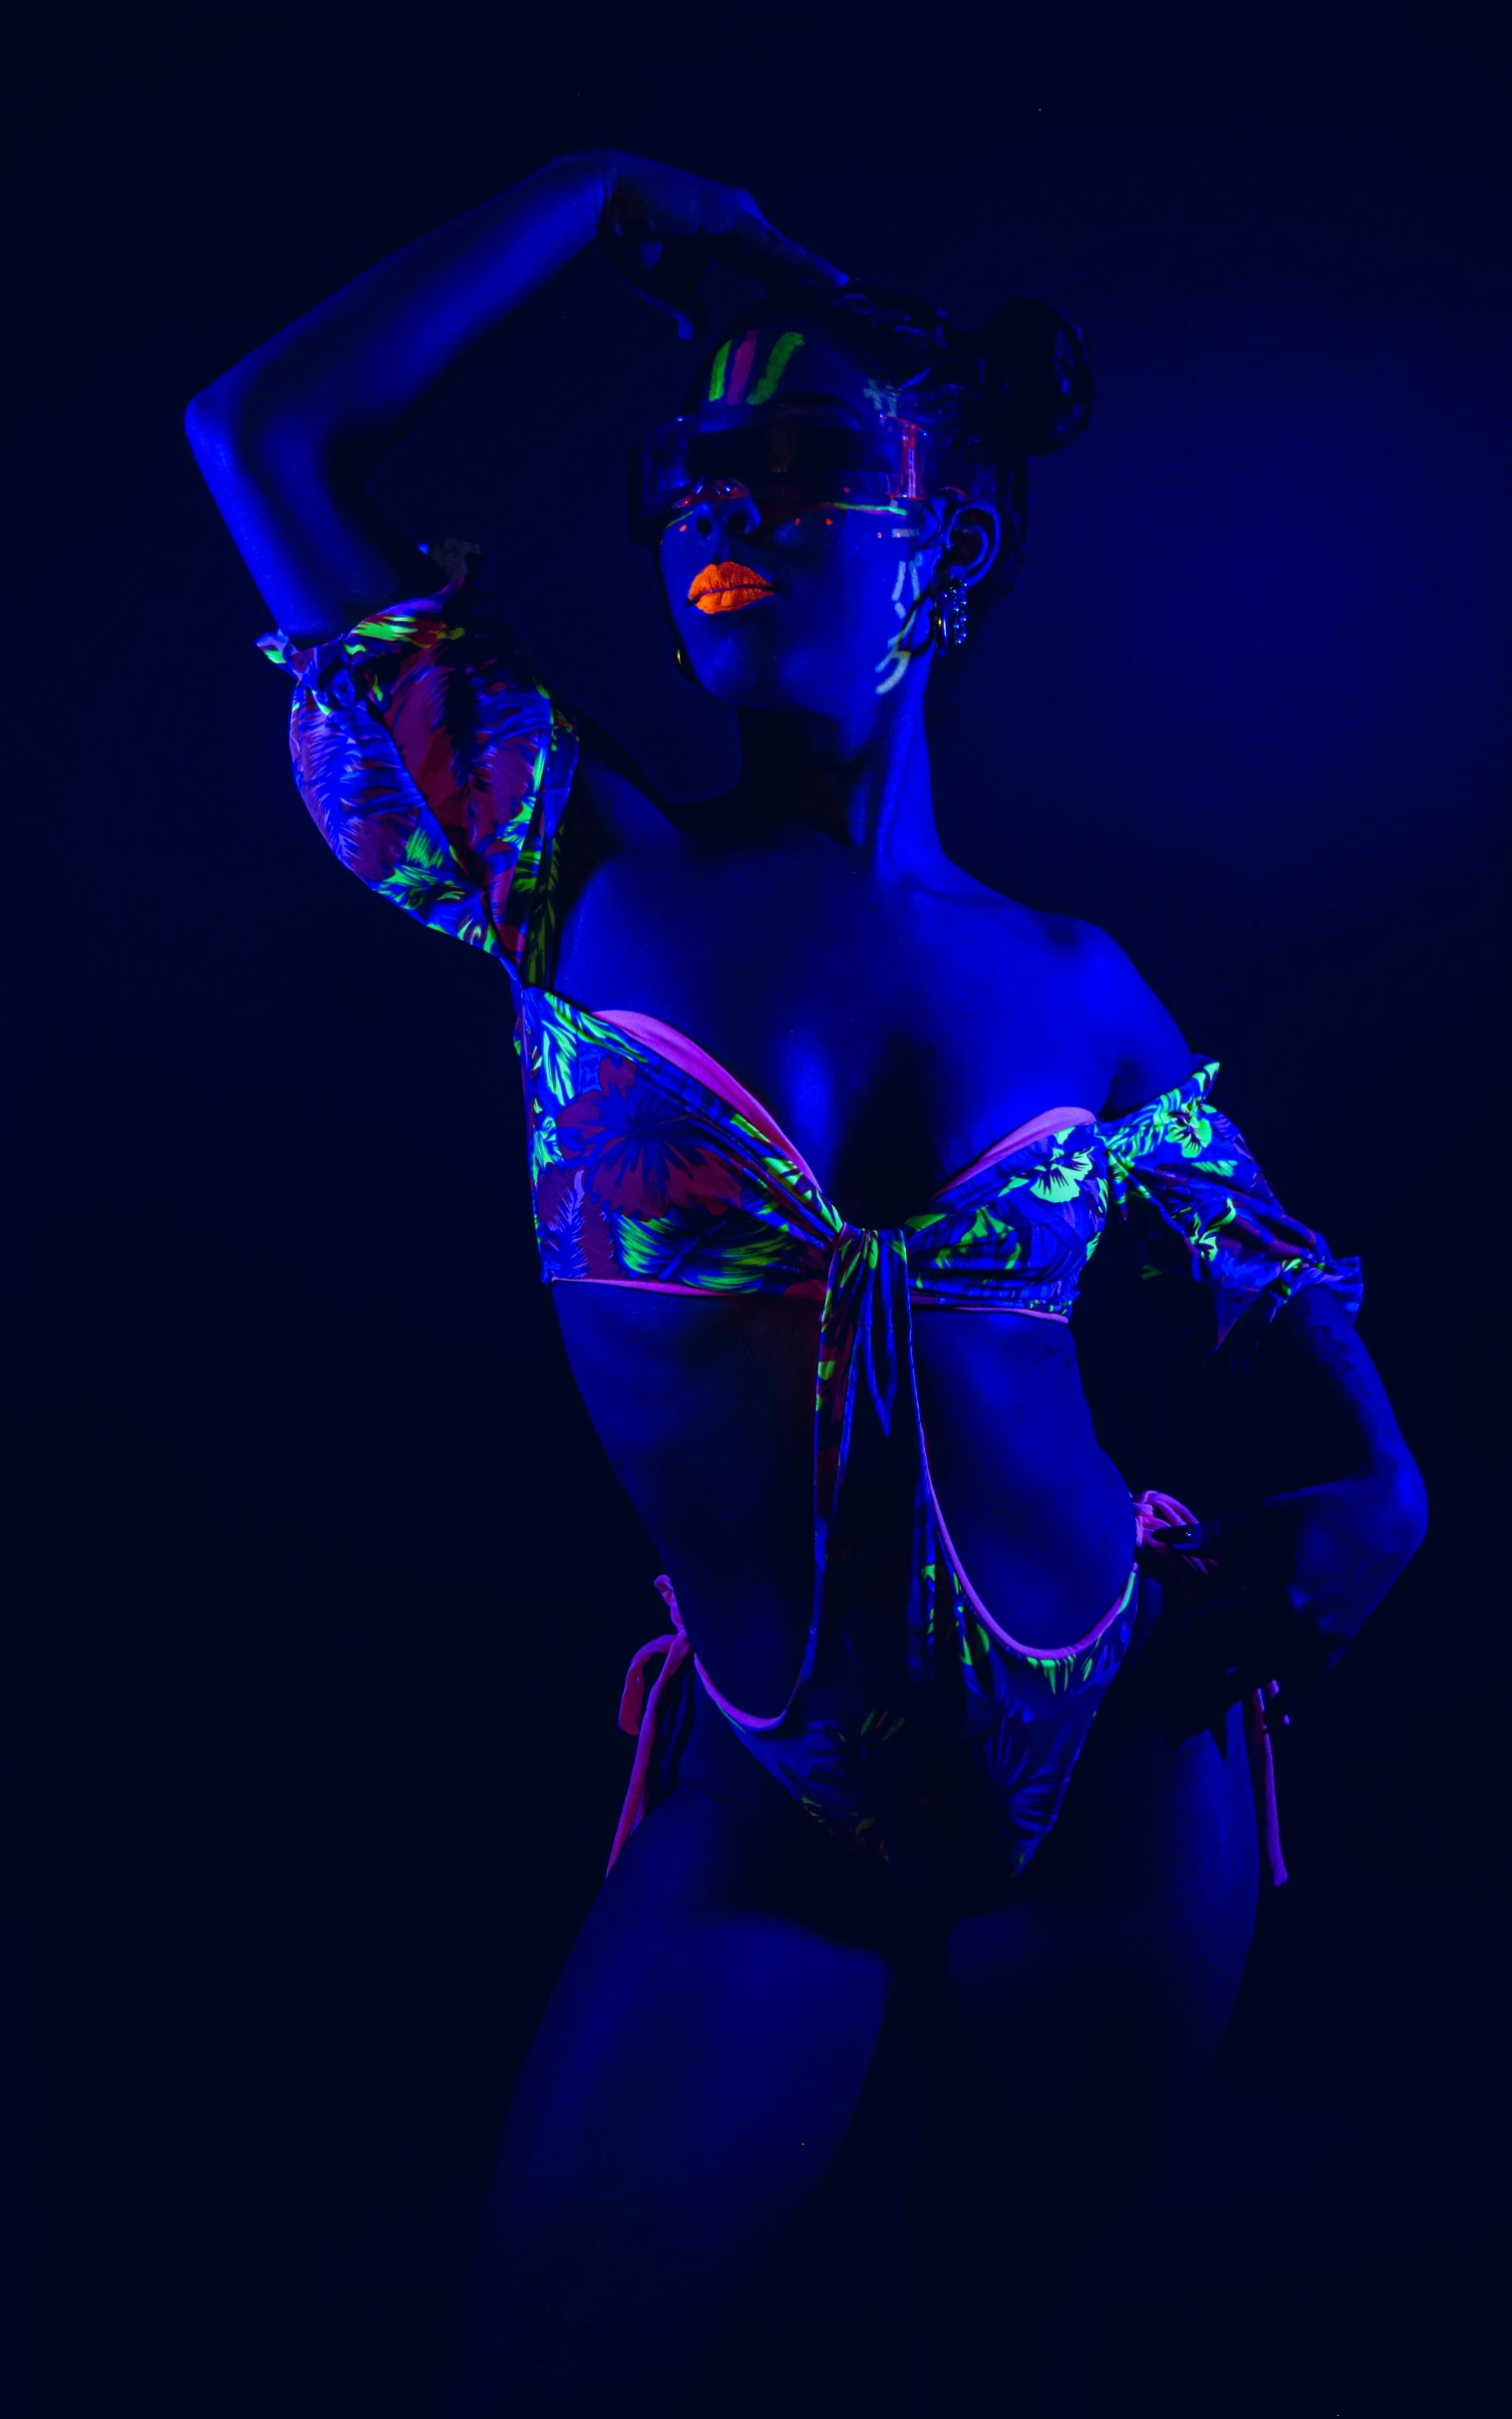 a woman in neon clothing poses with her hands on her hips